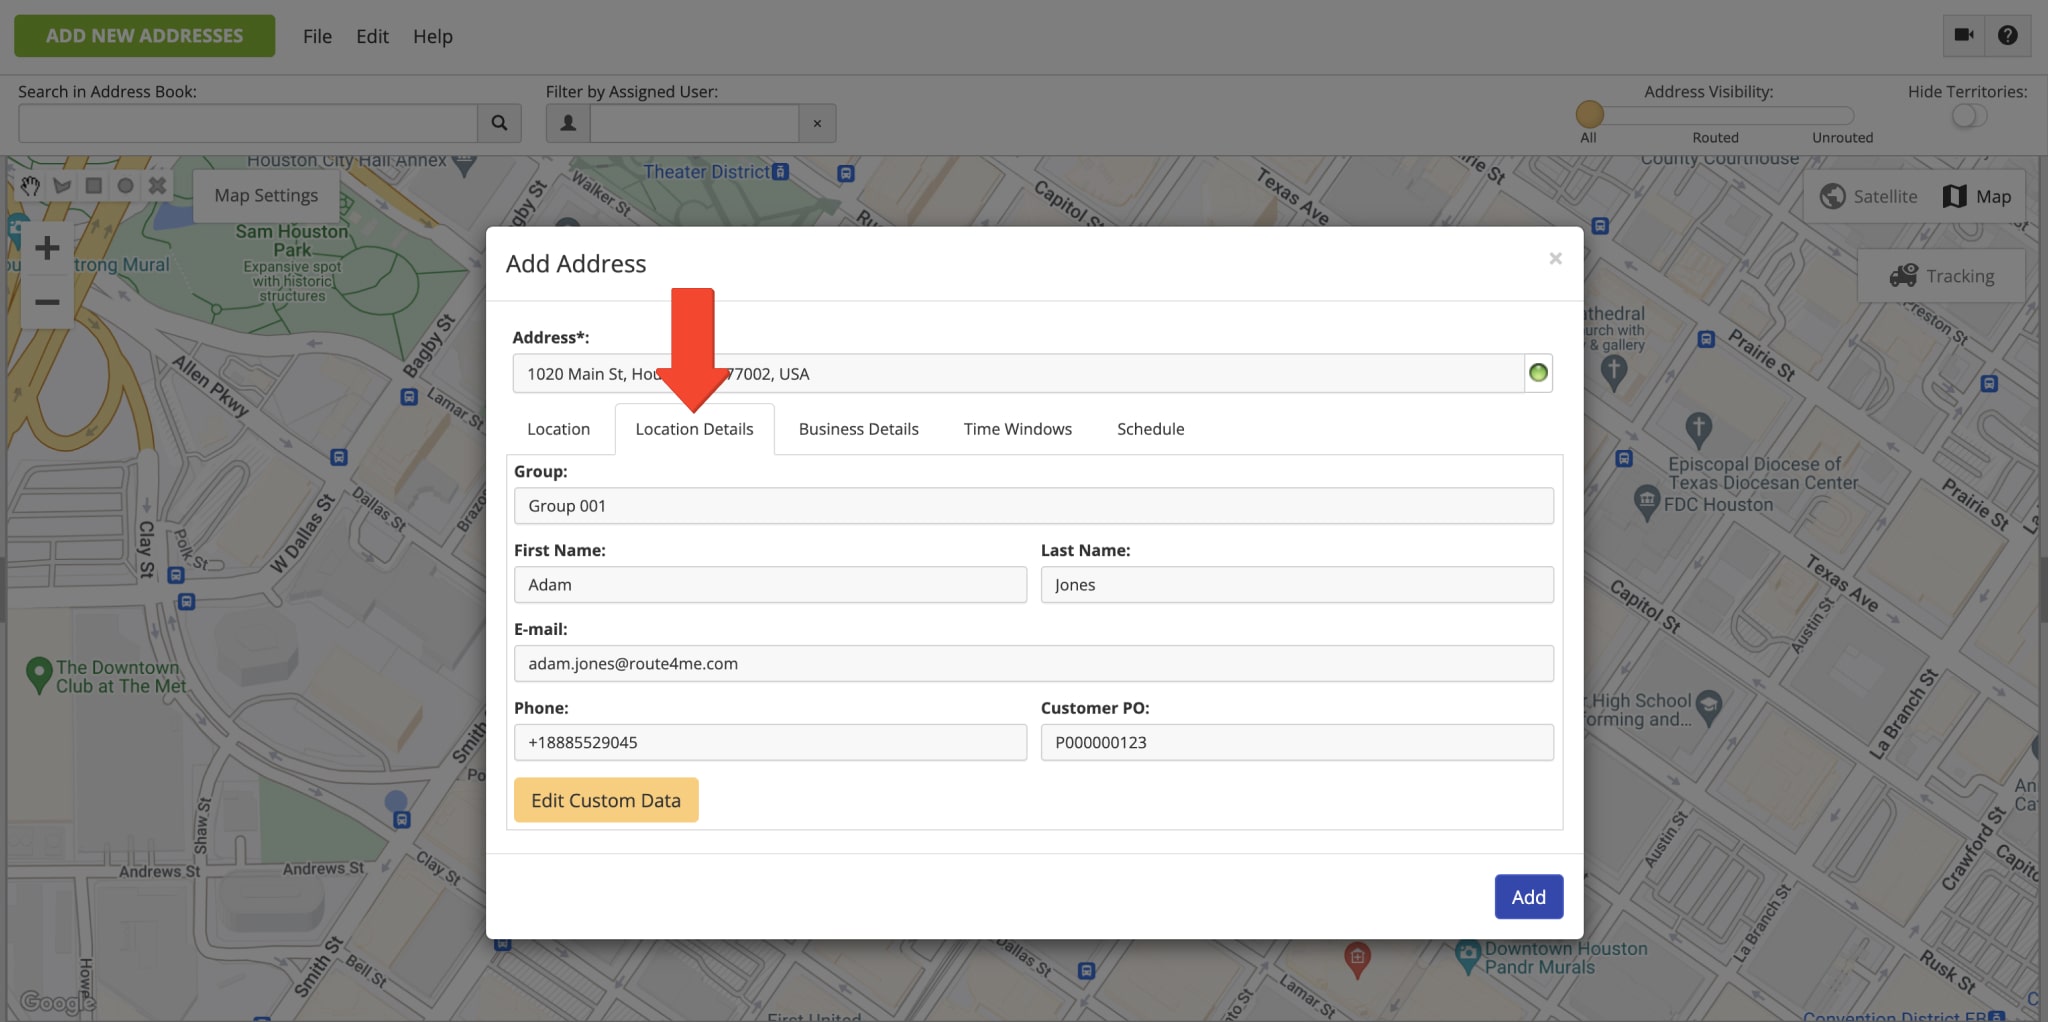 Use the address "Location Details" tab to add customer contact details, such as first and last name, phone number, email address, and more.